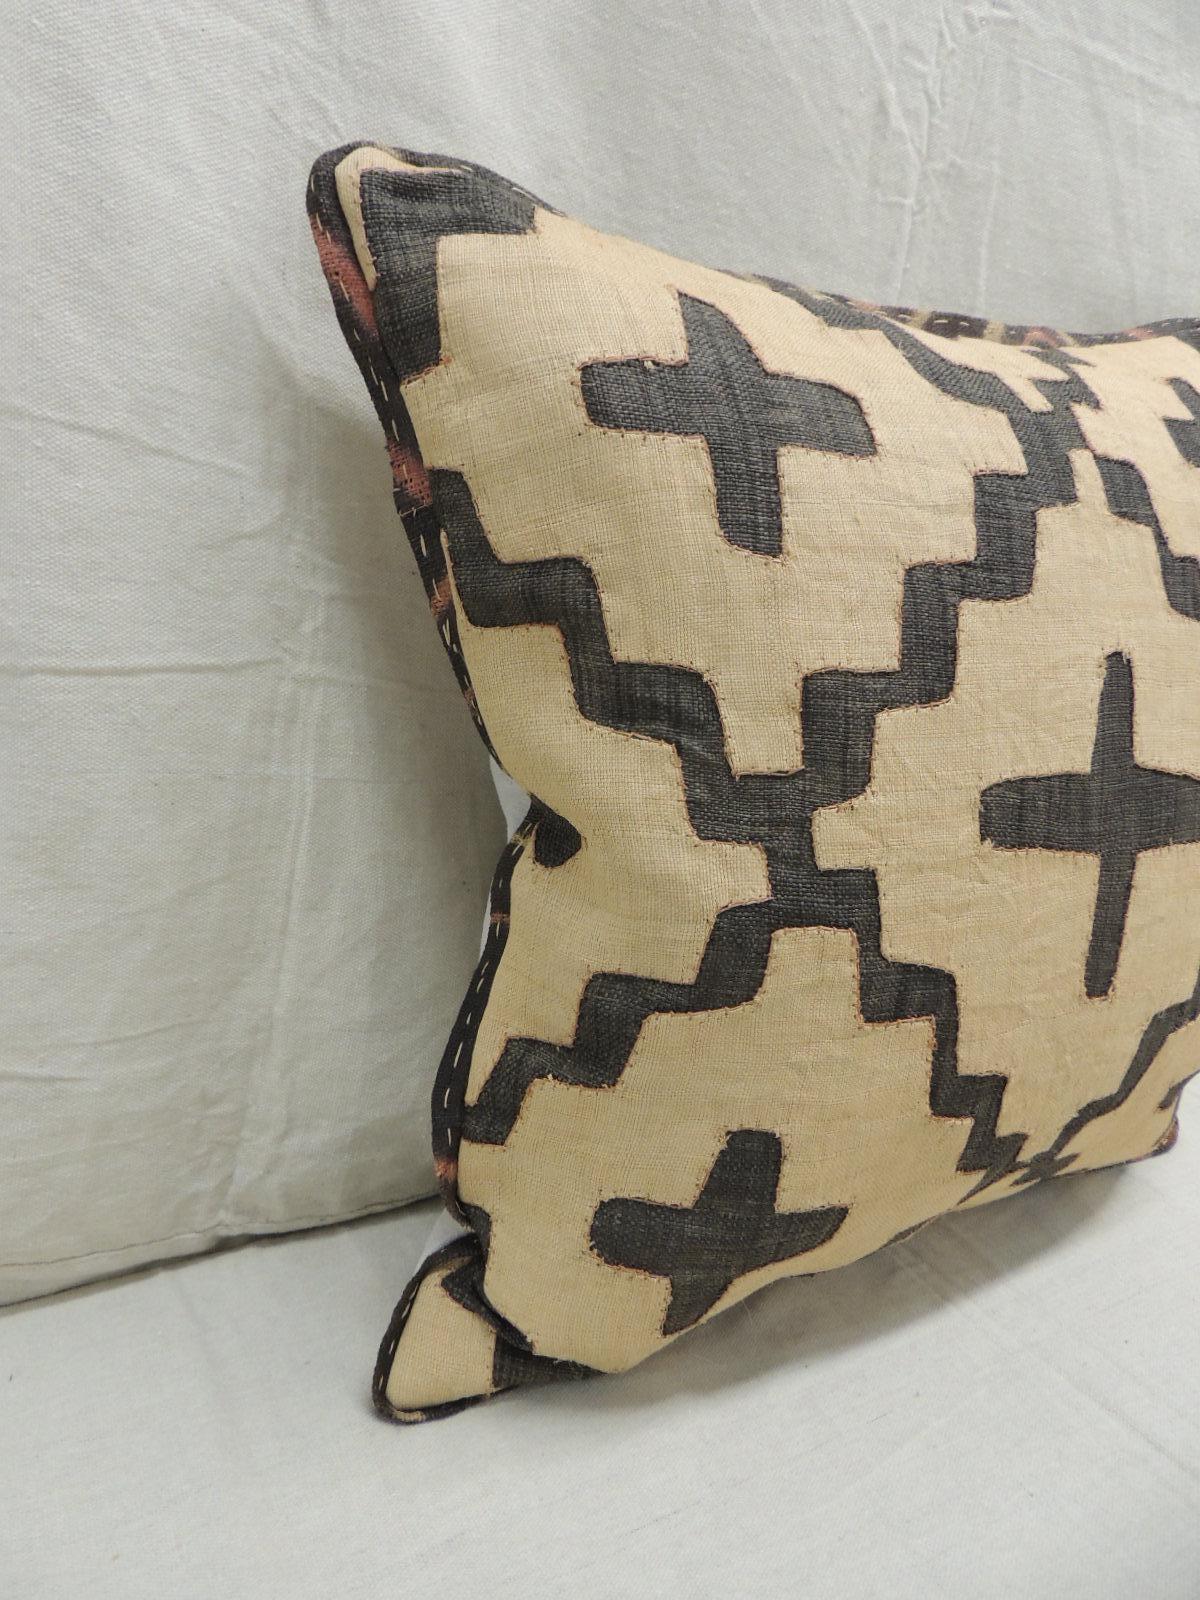 Vintage Kuba tan and black handwoven patchwork African decorative pillow.
Handwoven patchwork and appliqué raffia African decorative lumbar pillow with labyrinth pattern.
We used the original textile frame as a trim all around the pillow. Light gris